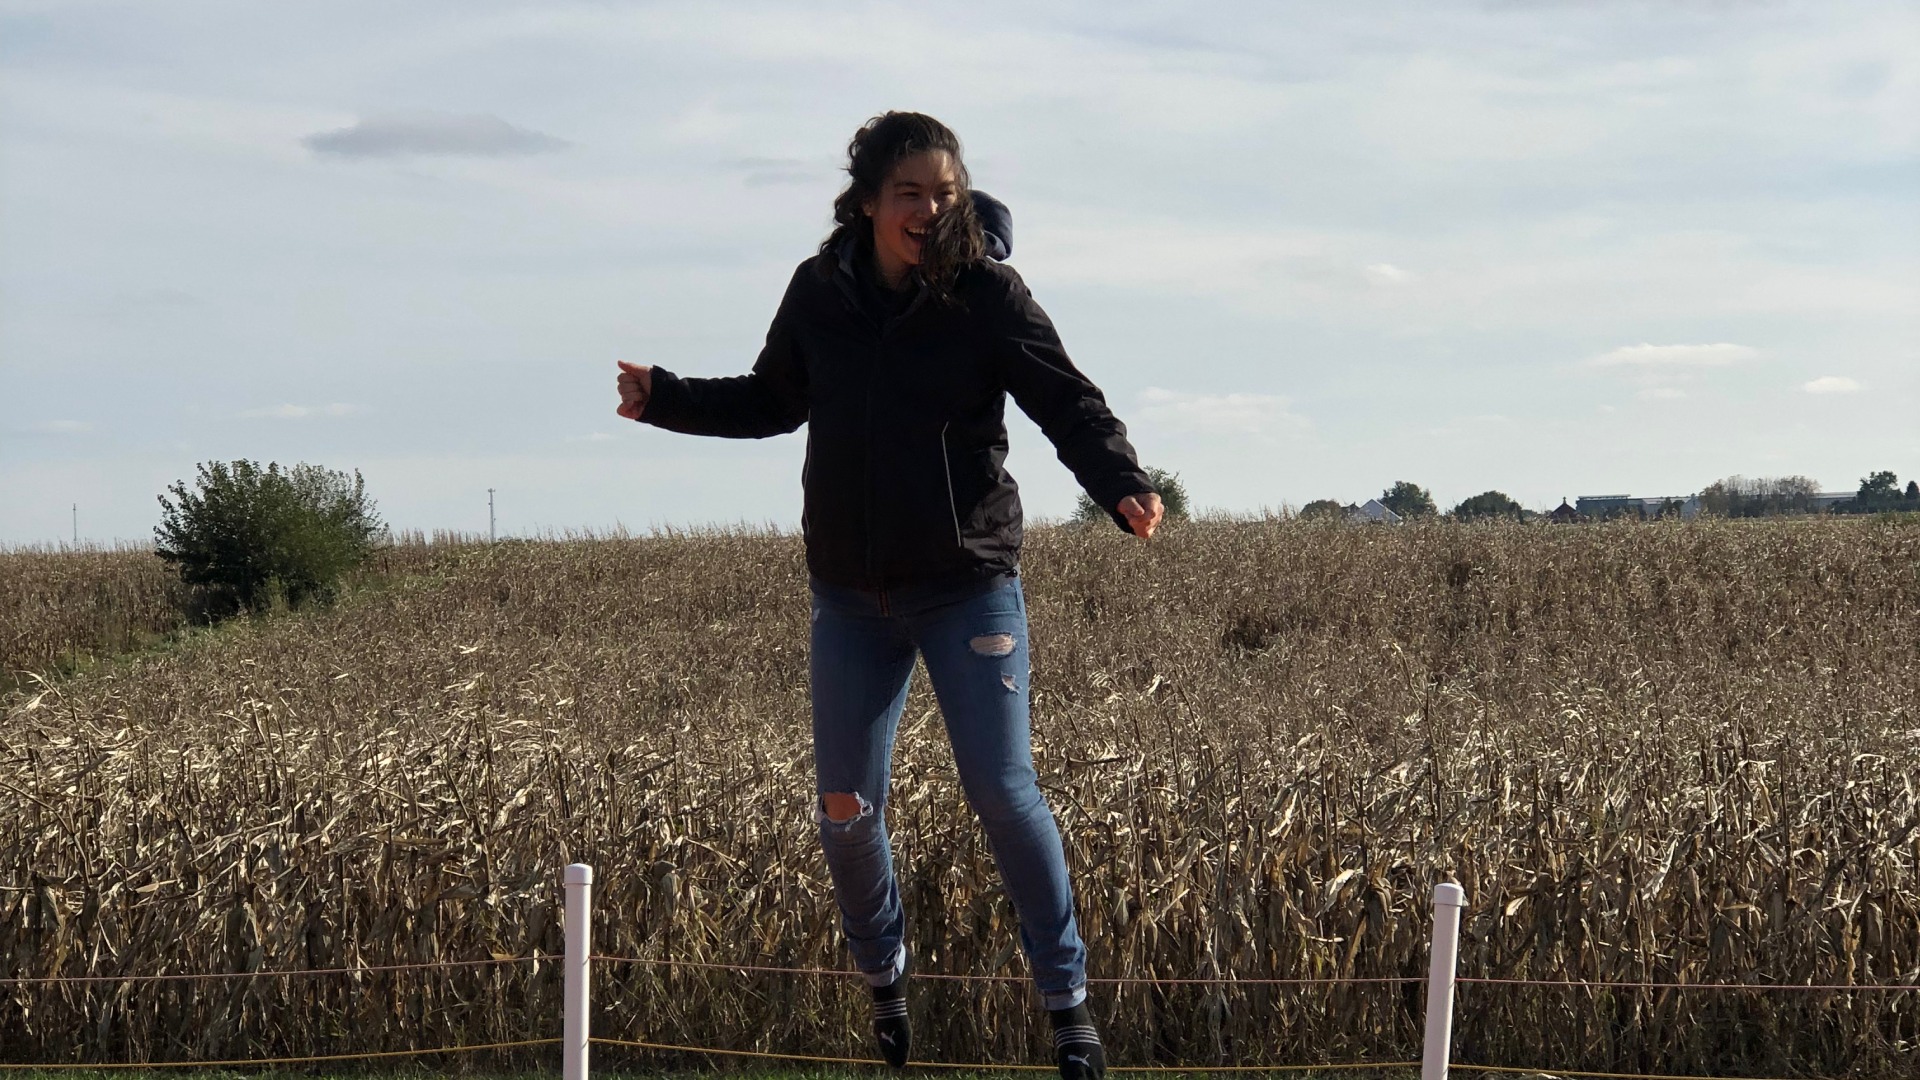 Girl jumping in front of farm field